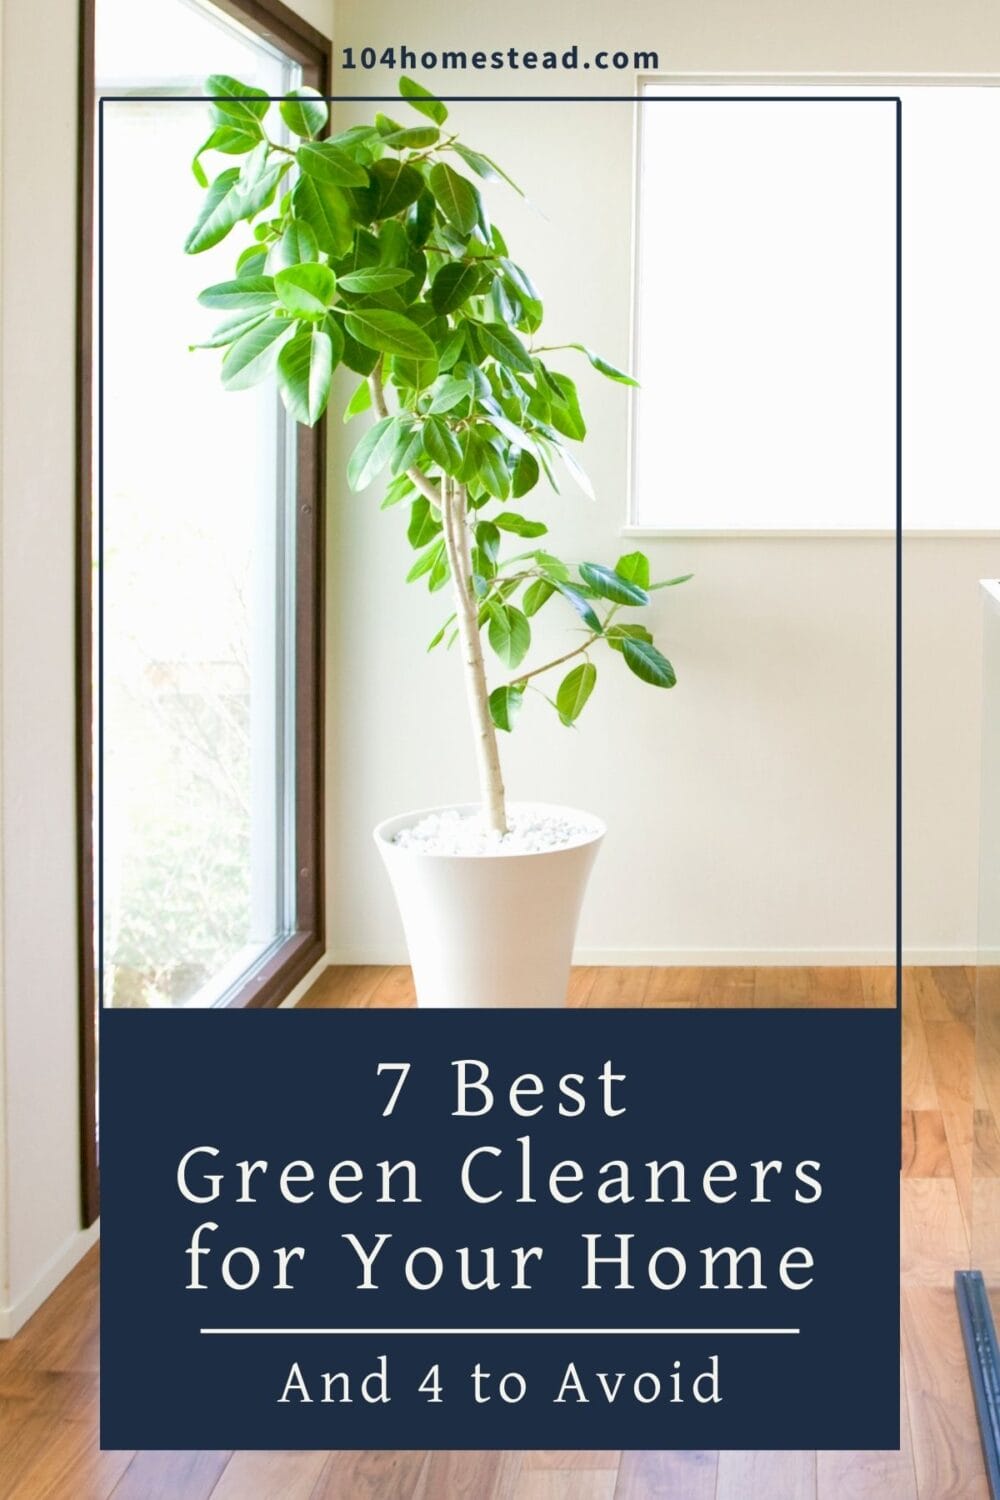 A Pinterest-friendly graphic for my list of favorite green cleaners that actually work.